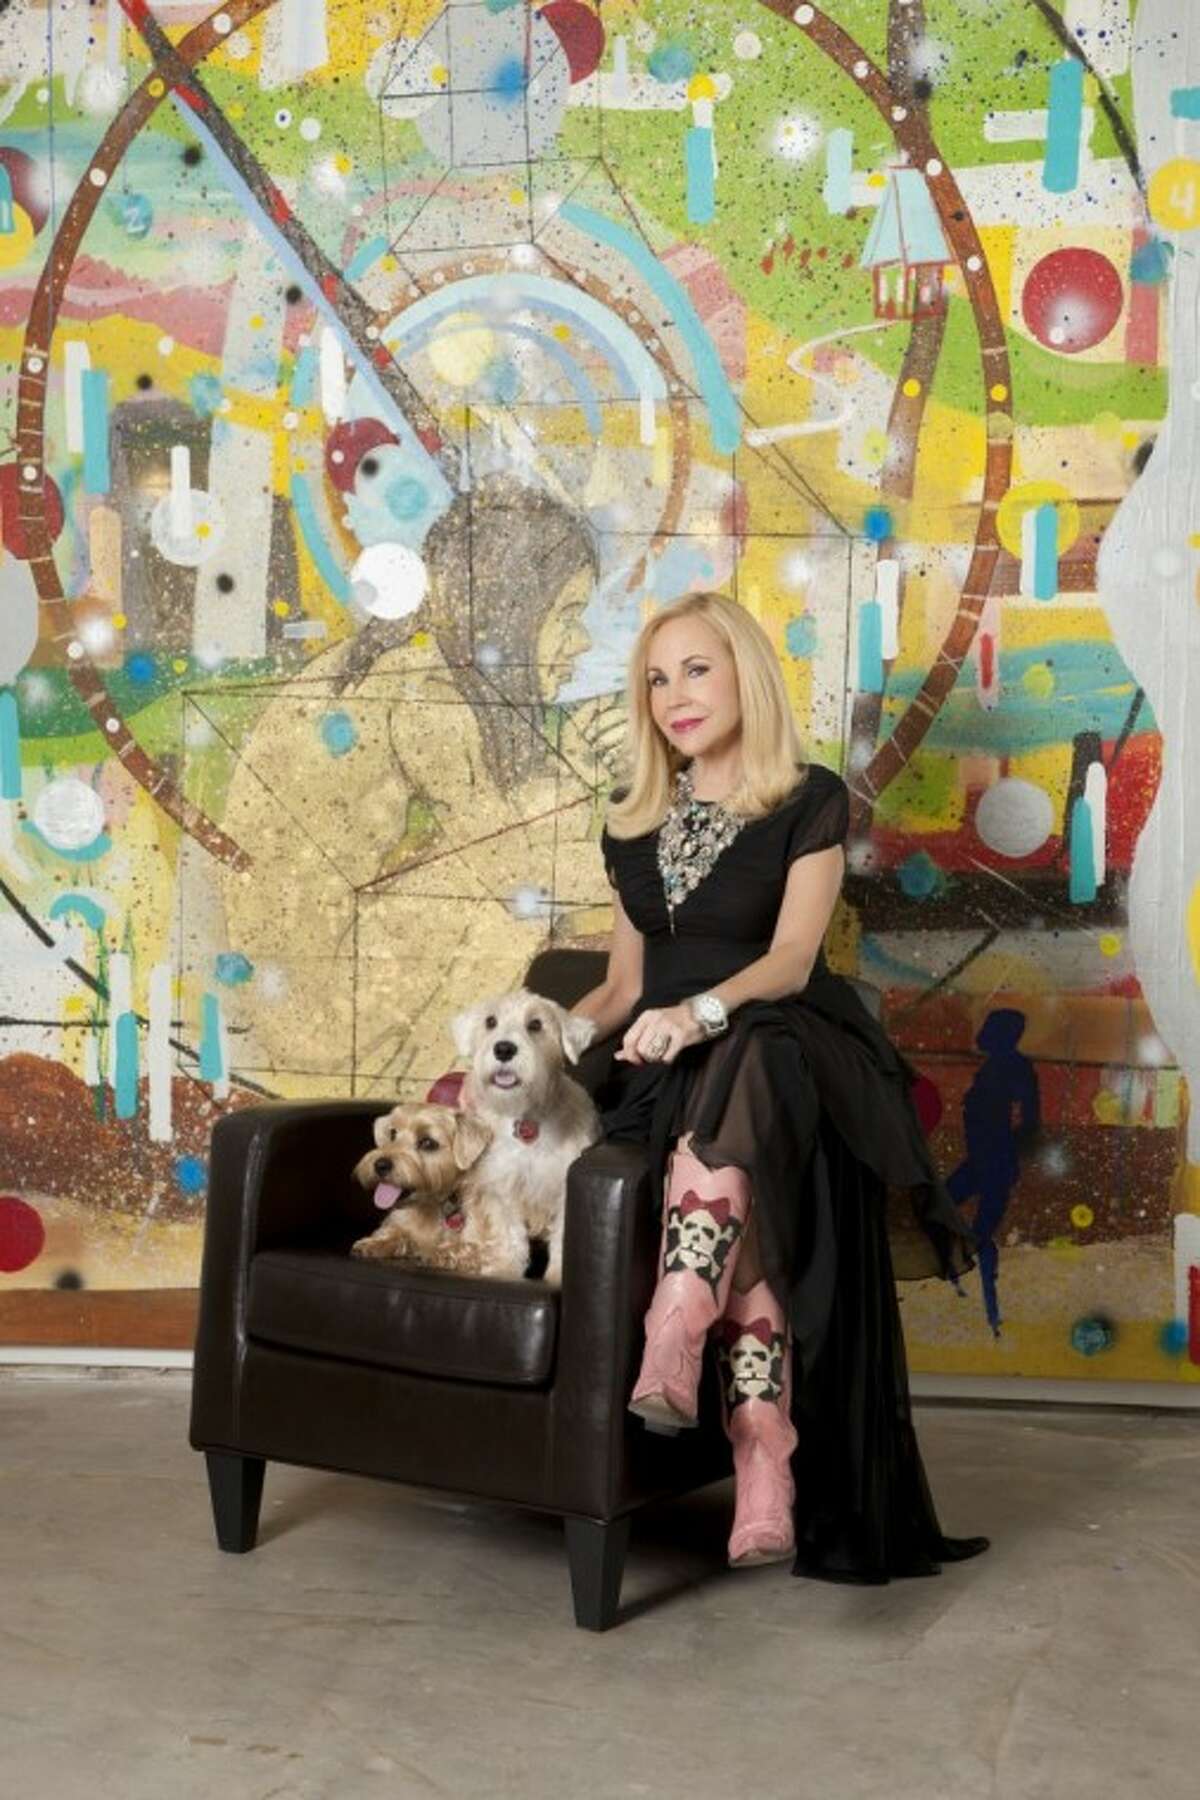 Houston artist and arts patron Carolyn Farb is pictured with her “two boys” Maximilian, right, and Lucus, left. The artwork in the background is by Angelbert Metoyer and it titled “My Last Vision in Memphis (When Dirt turns to Gold).”